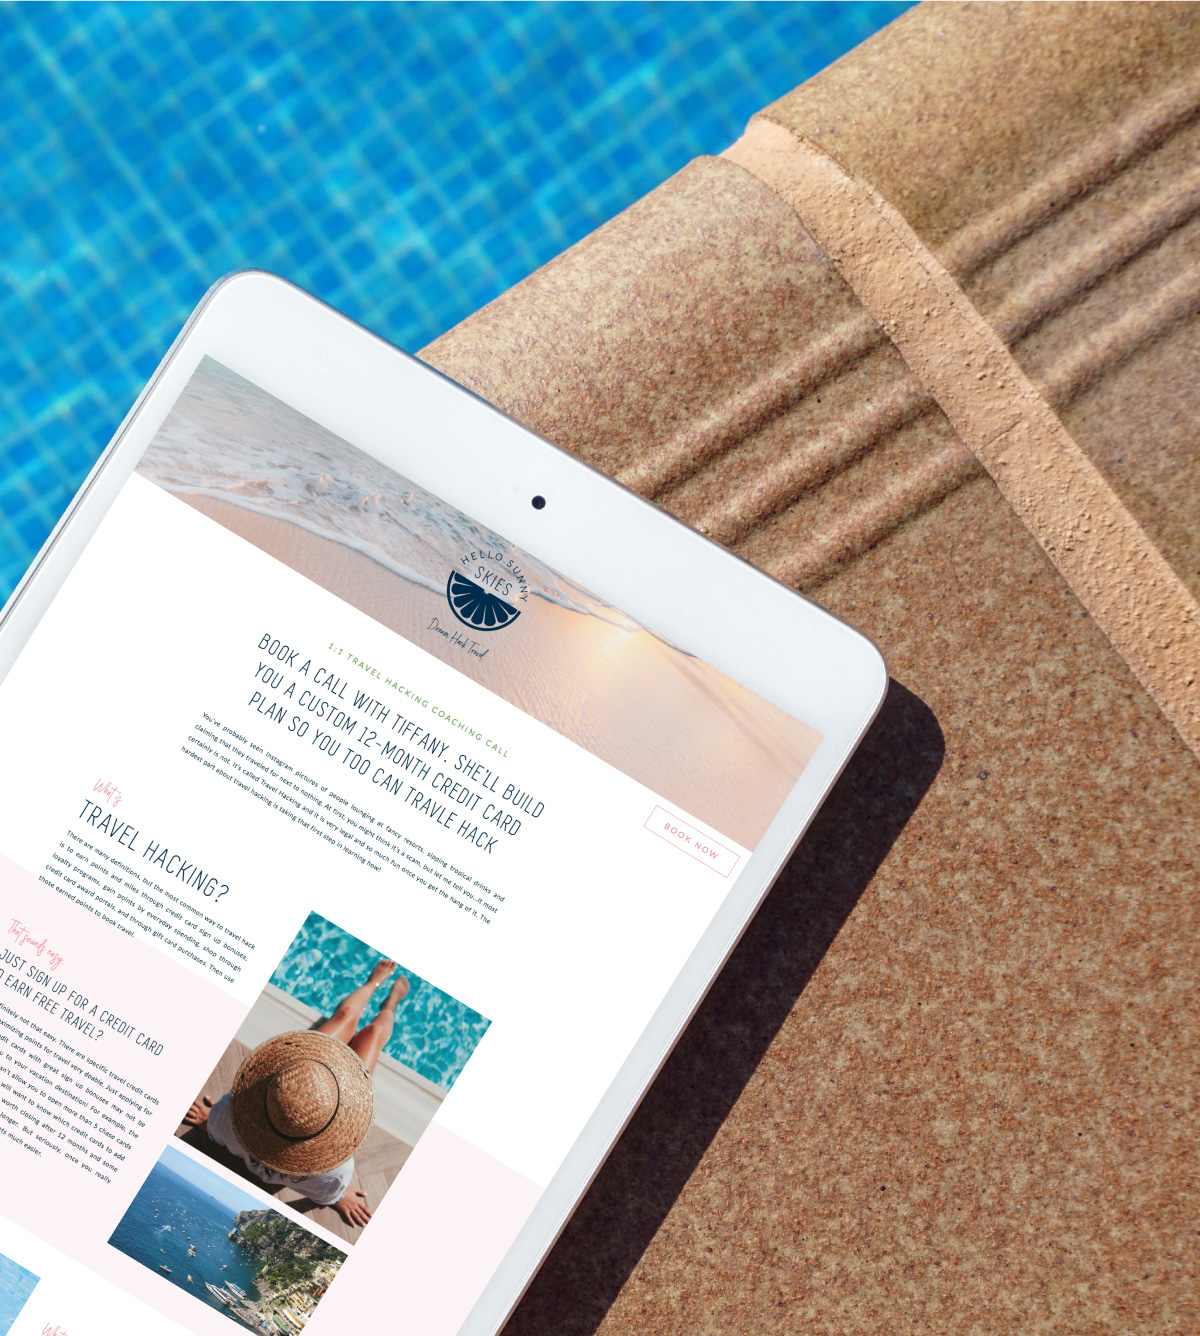 Showit website for Hello Sunny Skies, shown on an ipad by the pool